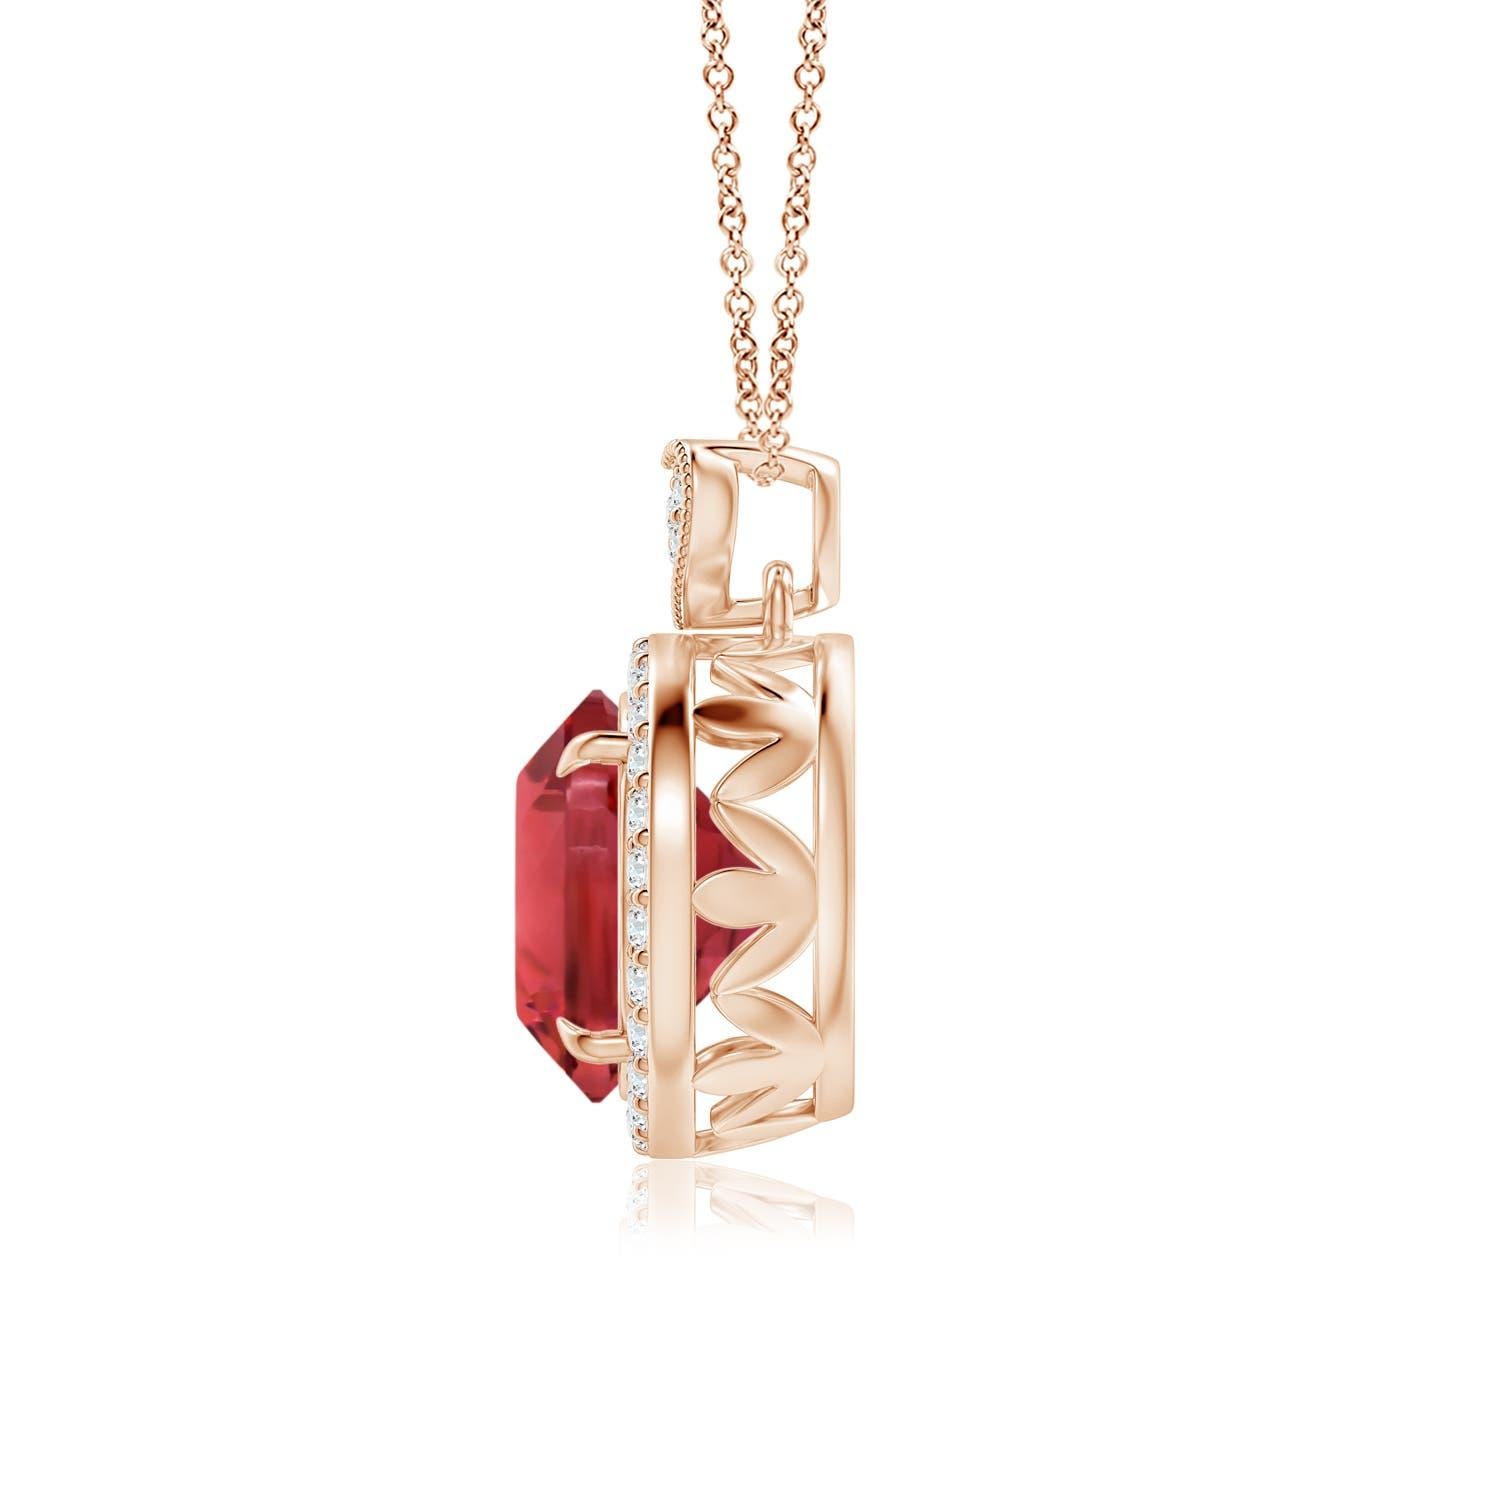 Embrace your romantic side with this charming pink tourmaline pendant, crafted in 14k rose gold. The GIA certified pink tourmaline is claw-set within a halo of sparkling diamonds. It is topped with a diamond-encrusted heart-shaped bale, fringed with